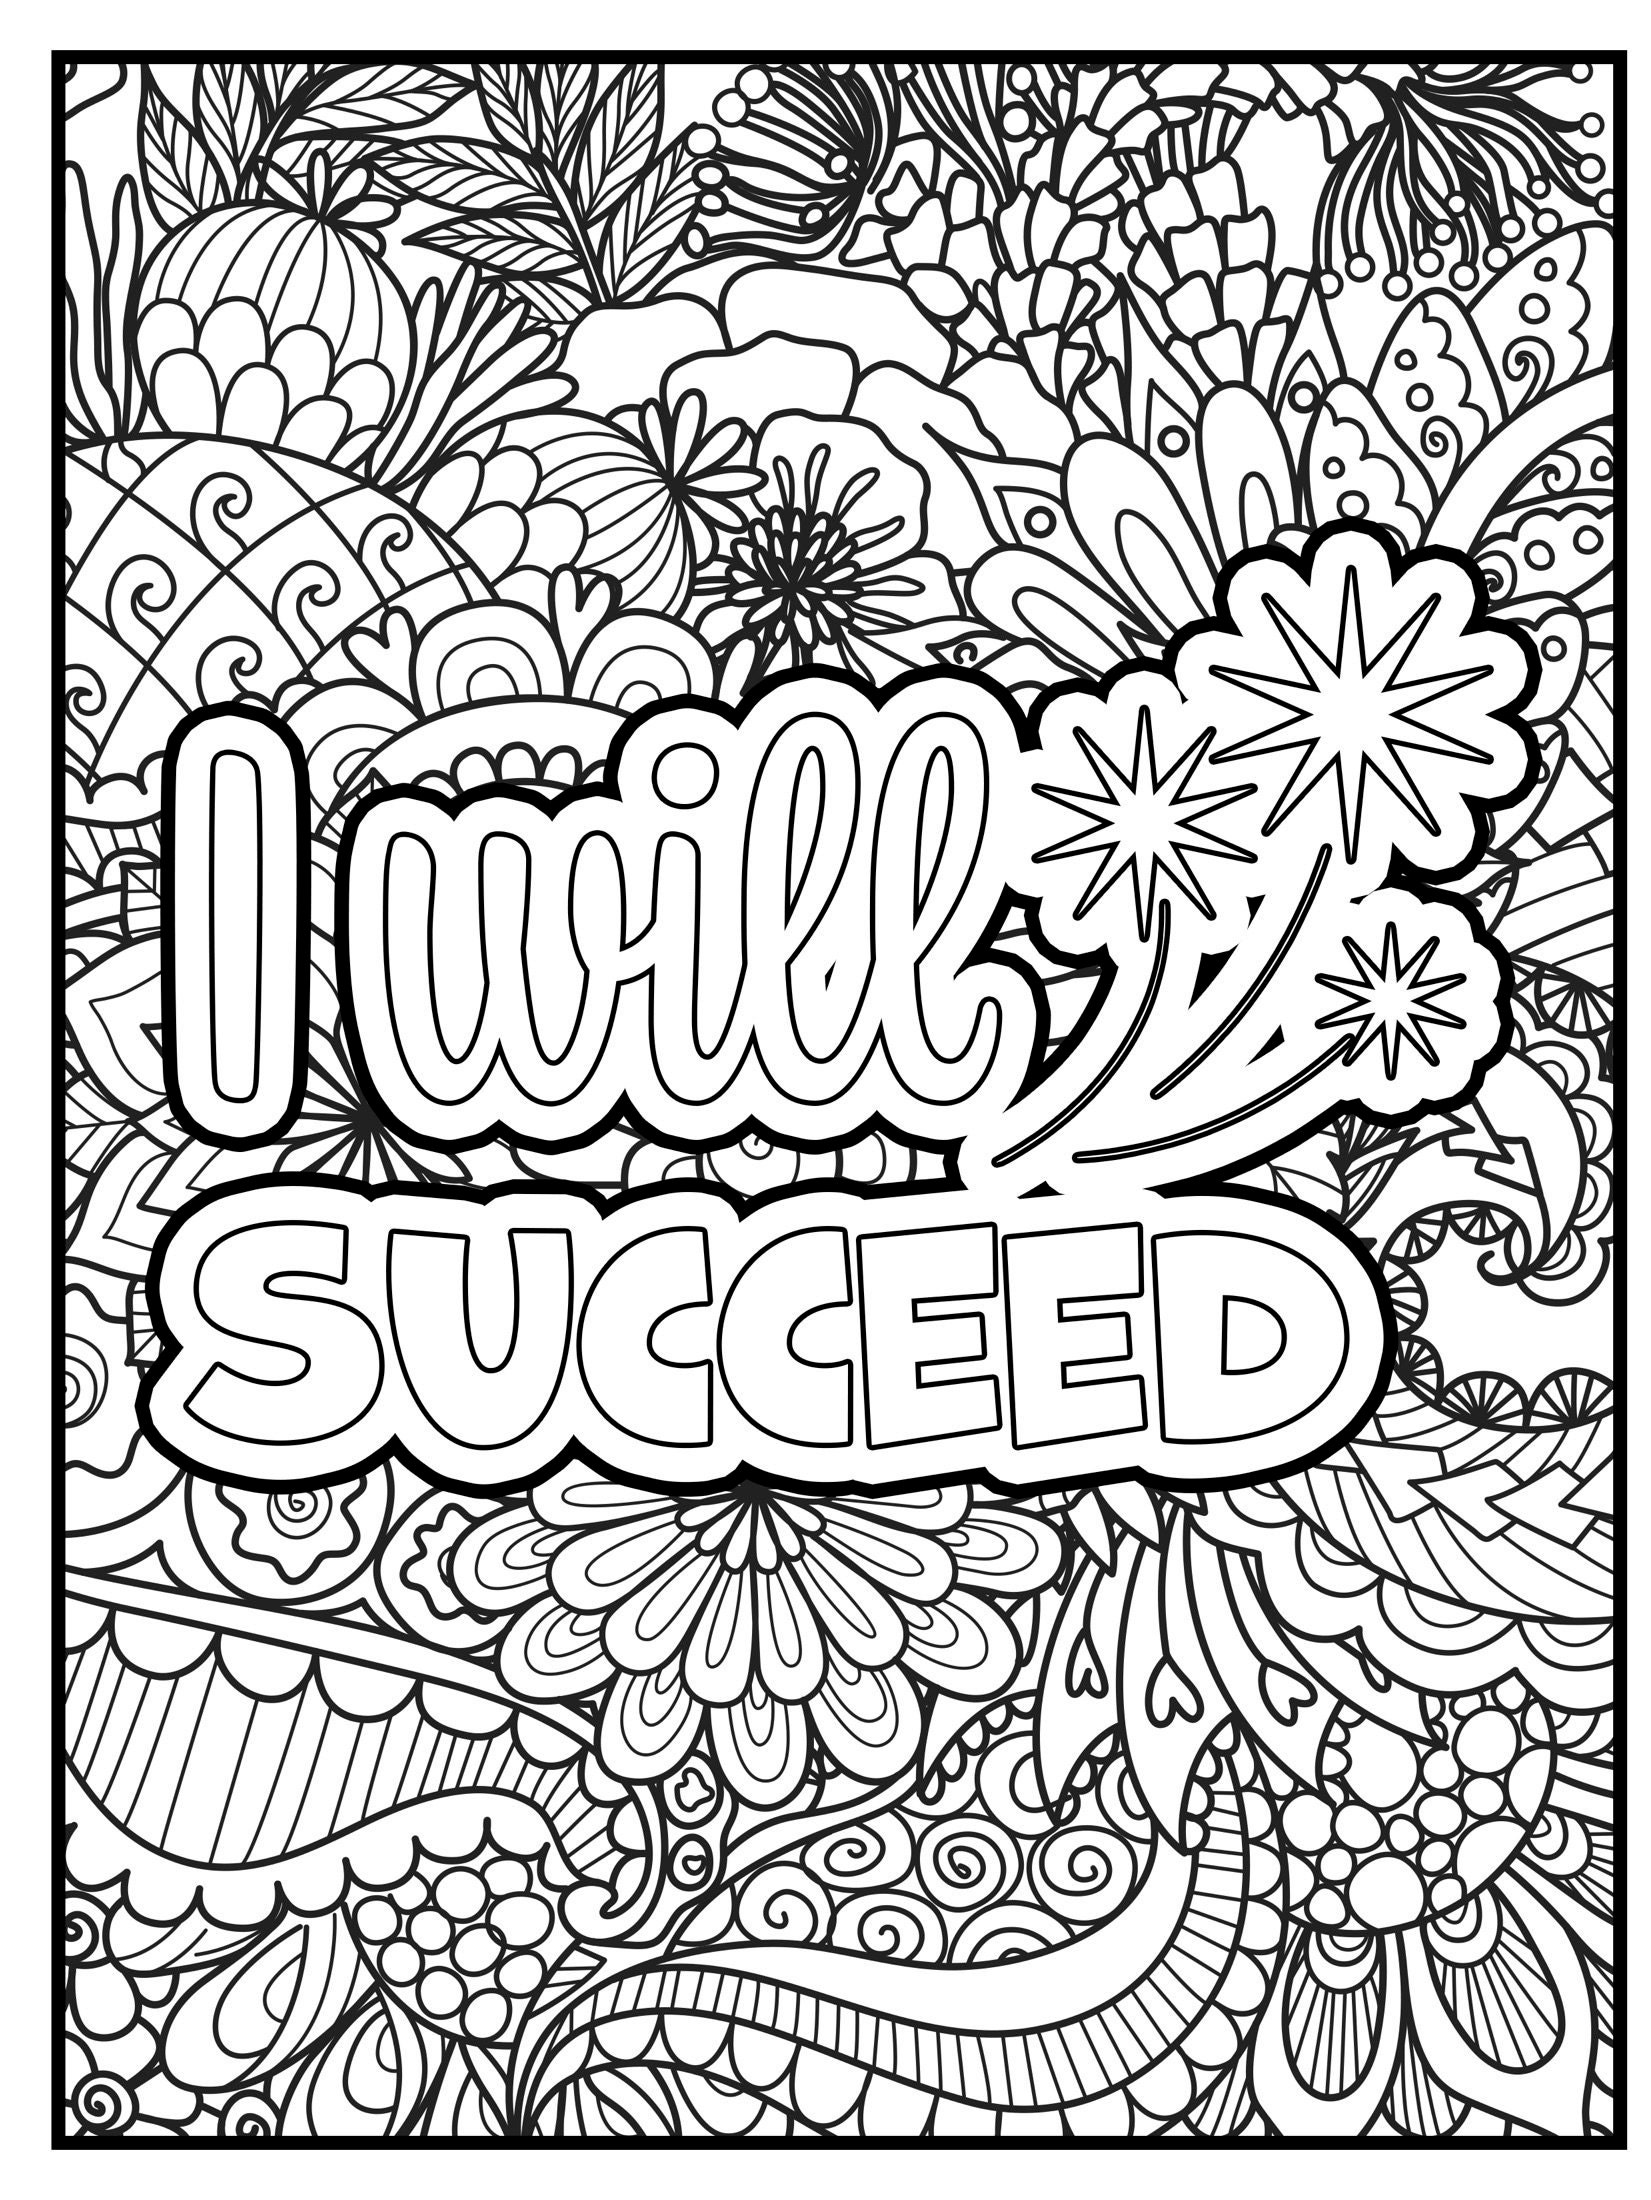 Motivational Adult Curse Coloring Books with Positive Quotes, Inspiring  Words, Inappropriate Coloring Book to Stop Anxiety from Stopping You Ser.:  Adult Cursing Coloring Books - Blow Anxiety Away (Anxiety Coloring Books) 